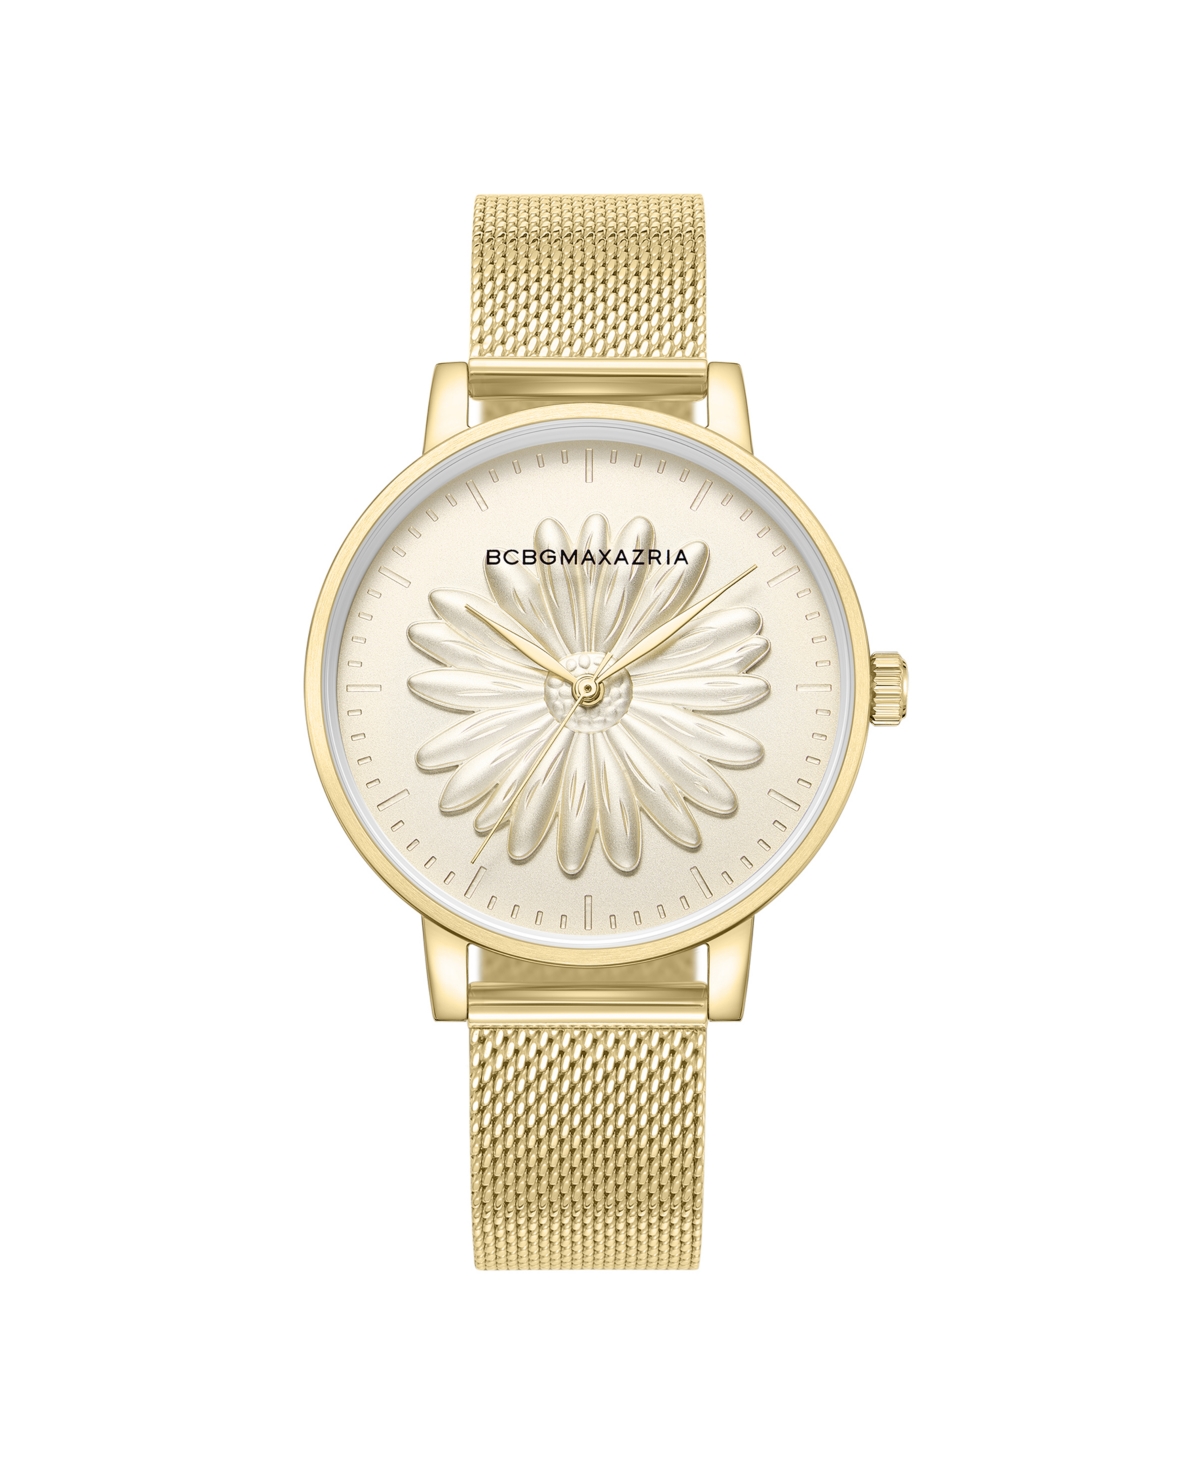 Bcbgmaxazria Women's Classic Gold-tone Stainless Steel Mesh Floral Watch 38mm